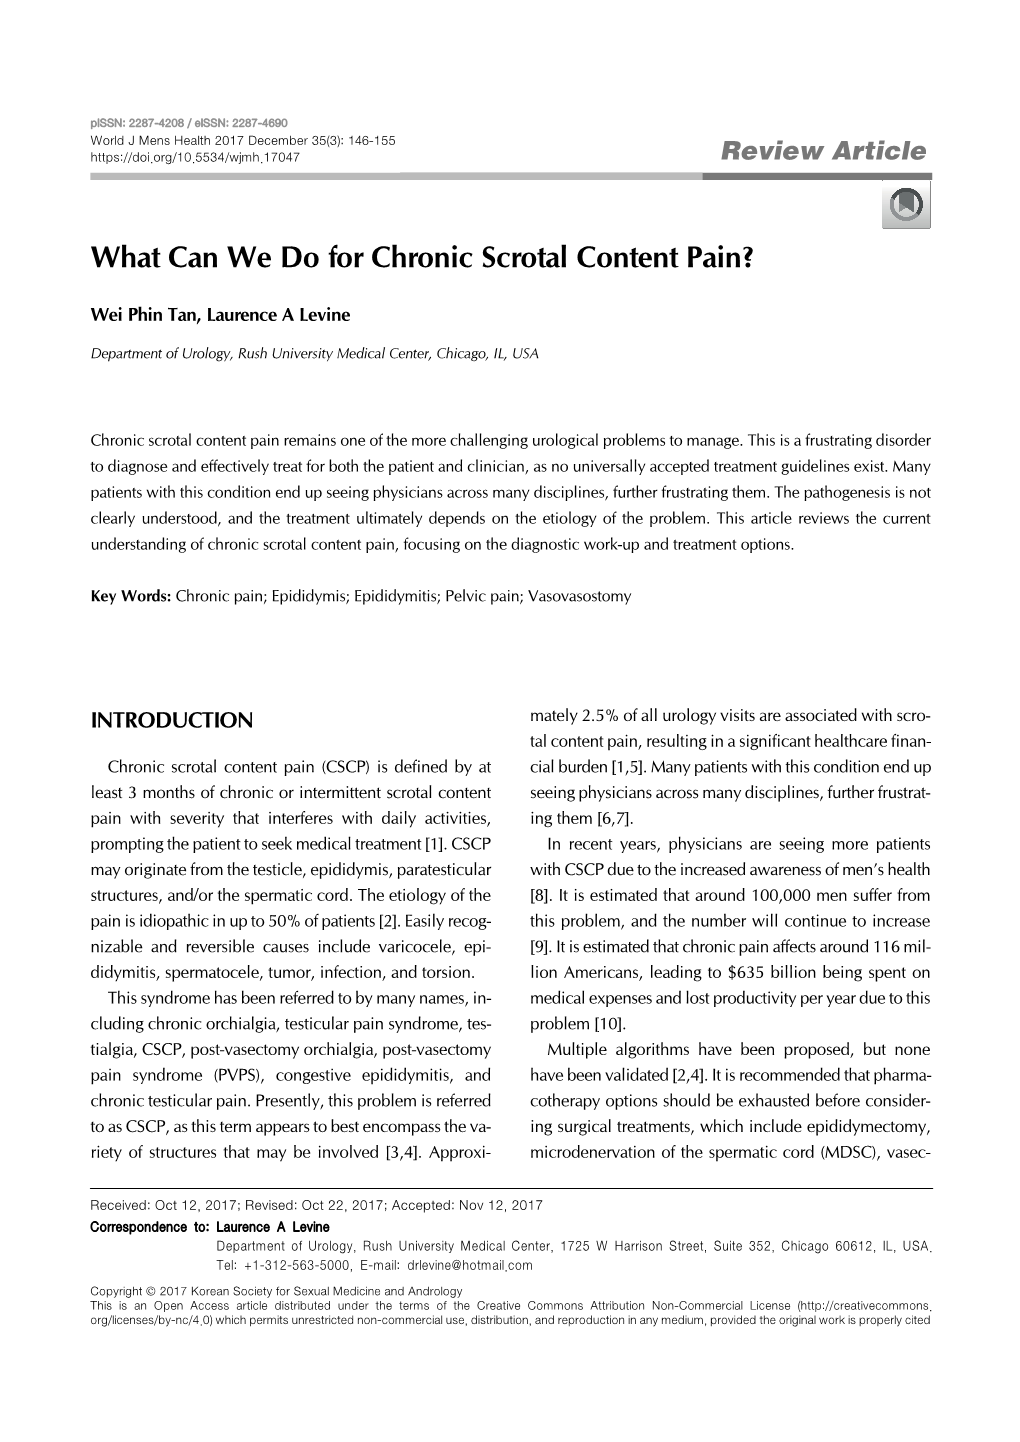 What Can We Do for Chronic Scrotal Content Pain?